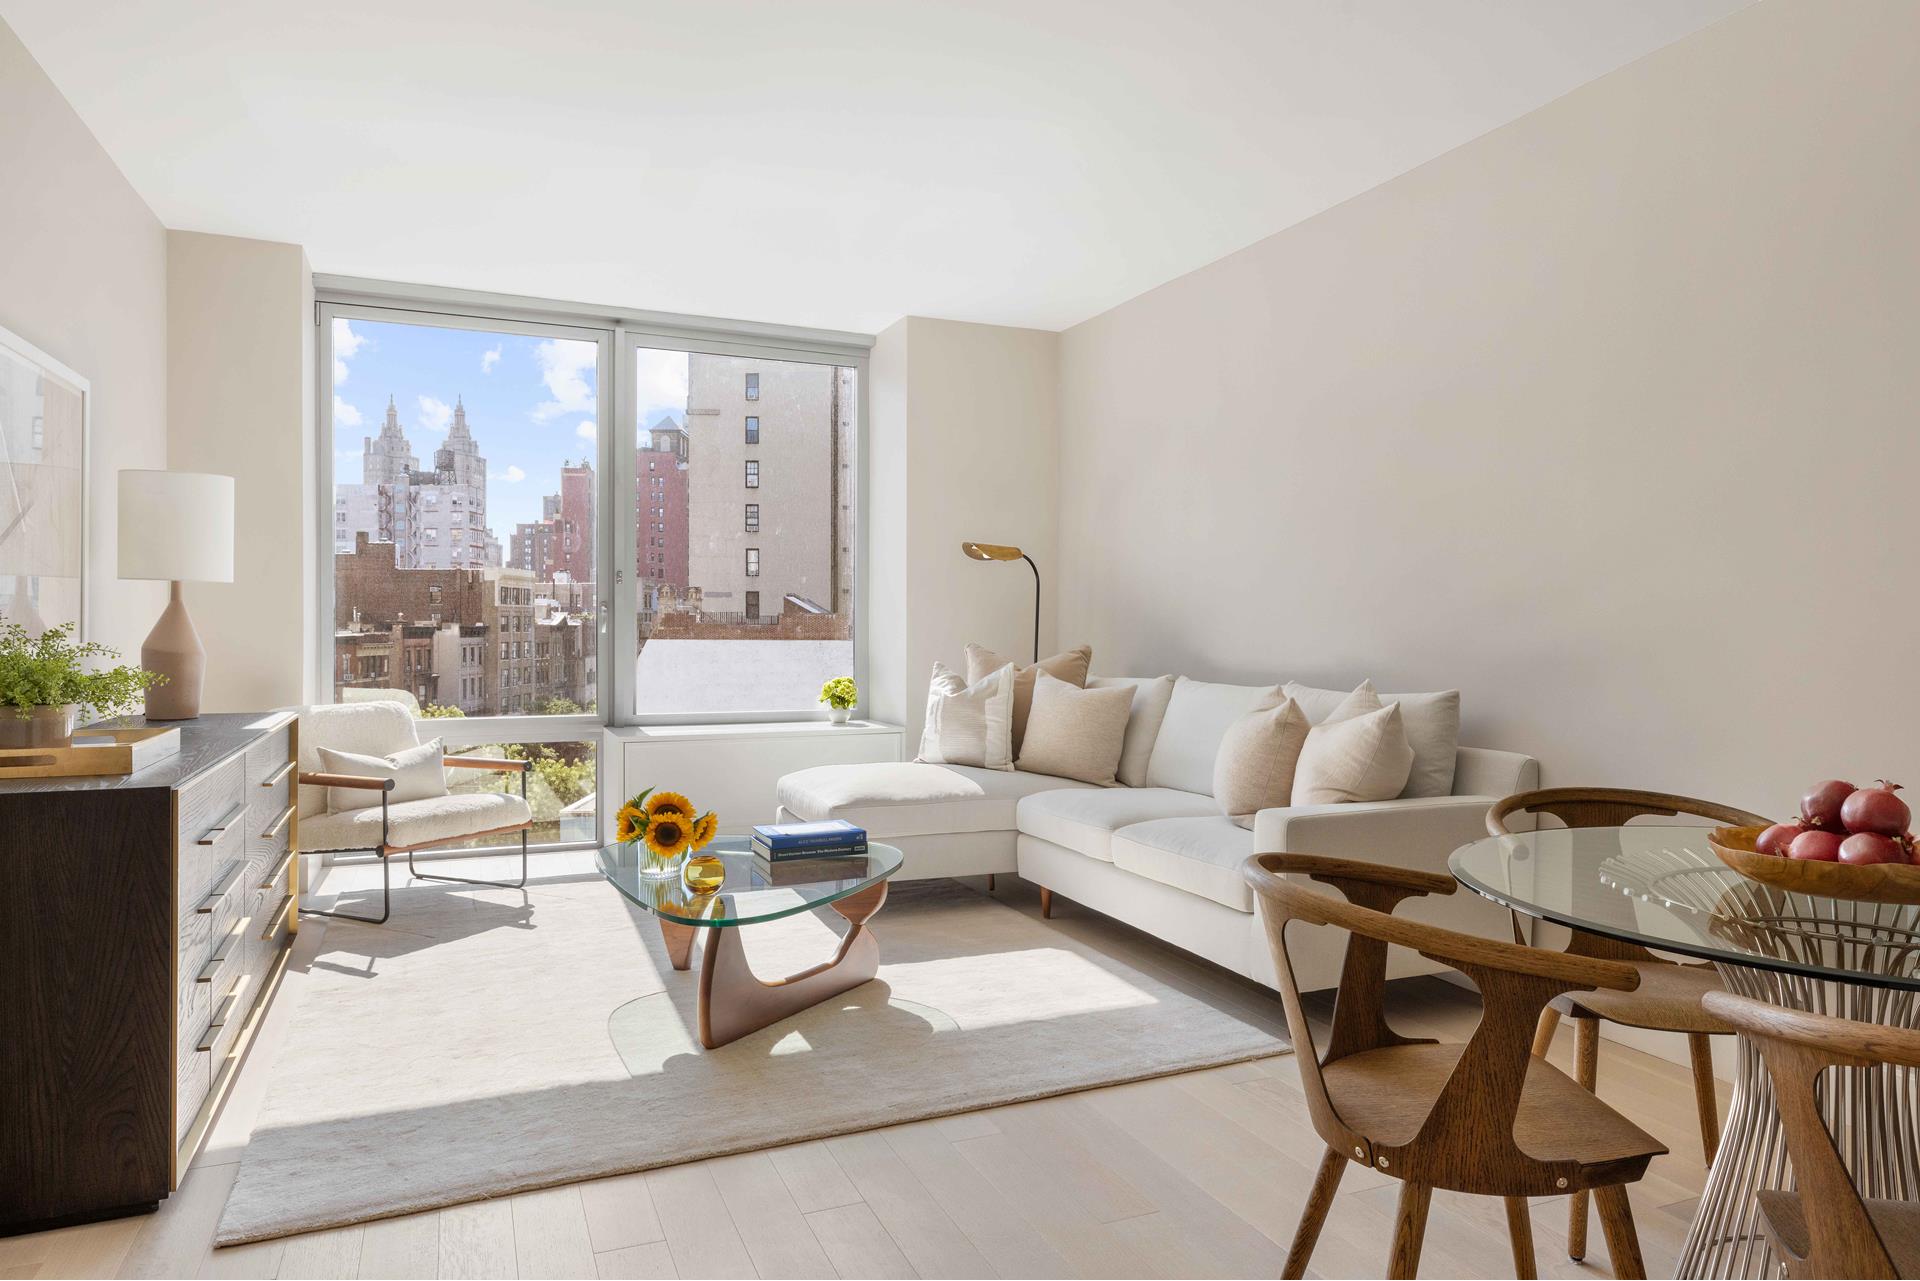 212 West 72nd Street 5J, Lincoln Sq, Upper West Side, NYC - 3 Bedrooms  
3 Bathrooms  
5 Rooms - 